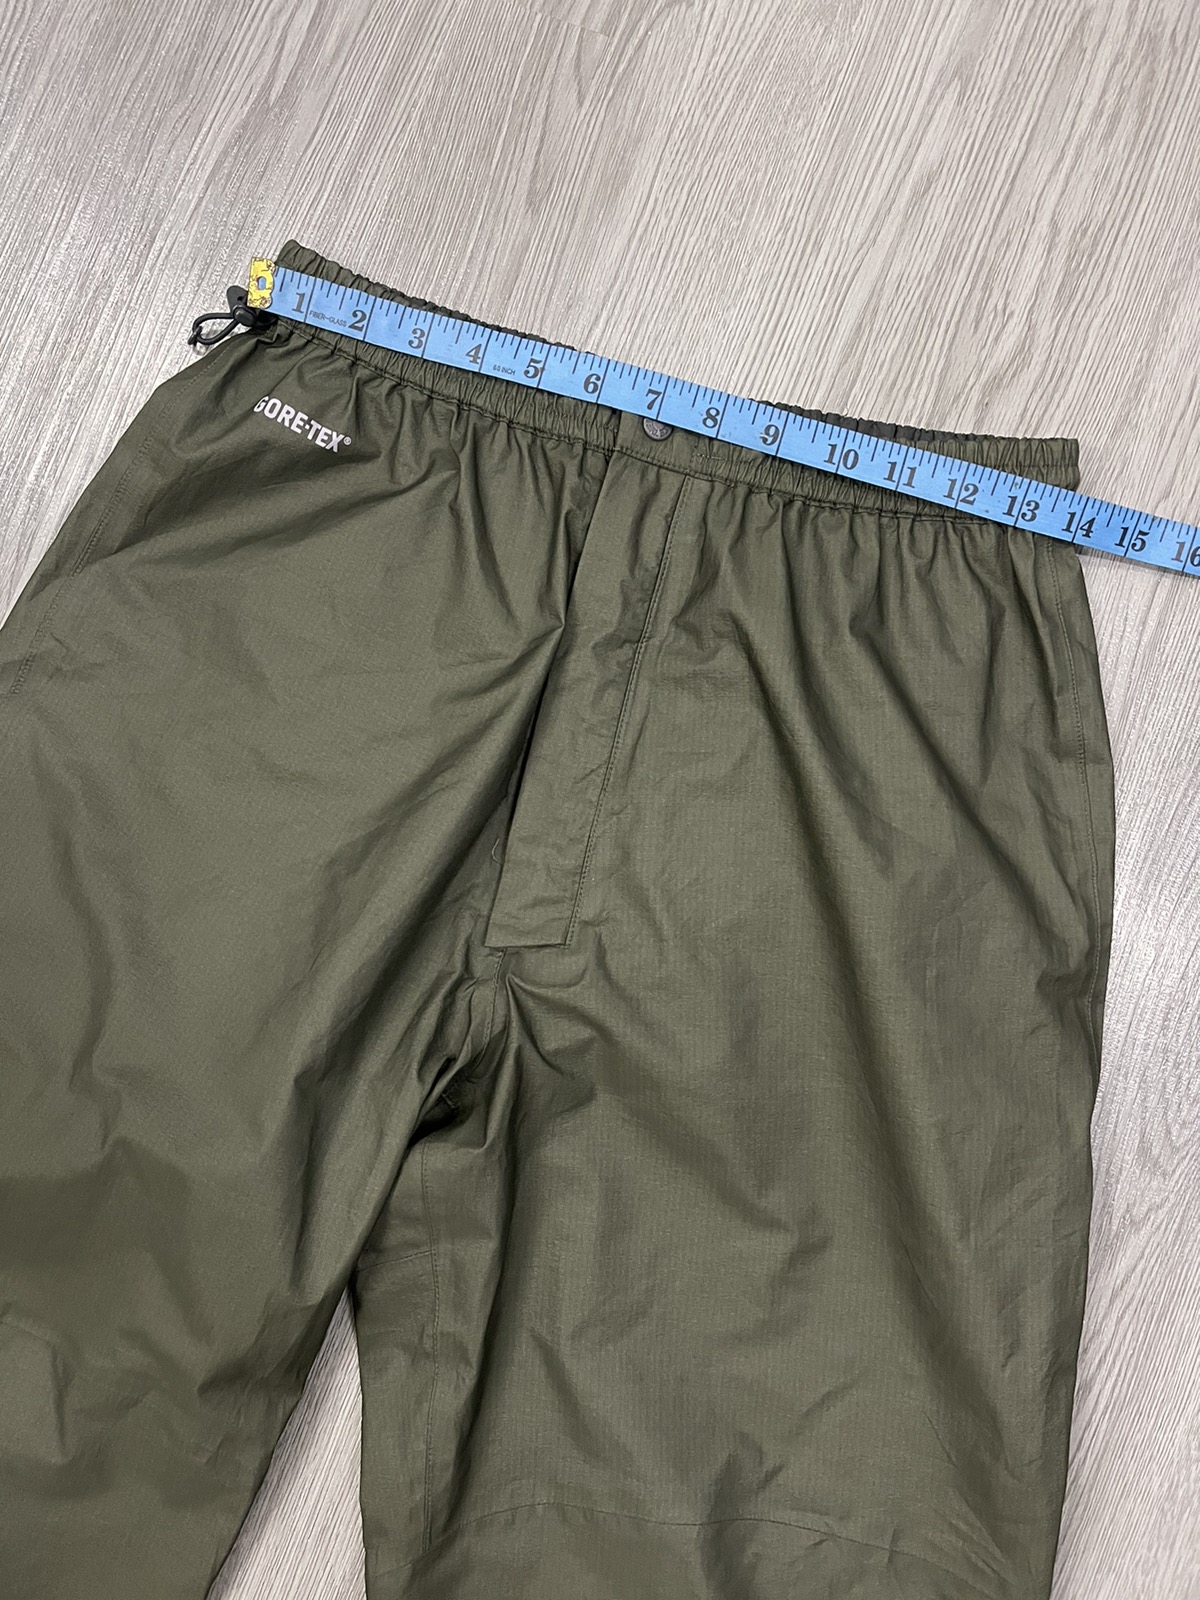 Gorpcore deal🔥The North Face Goretex pant in green - 12